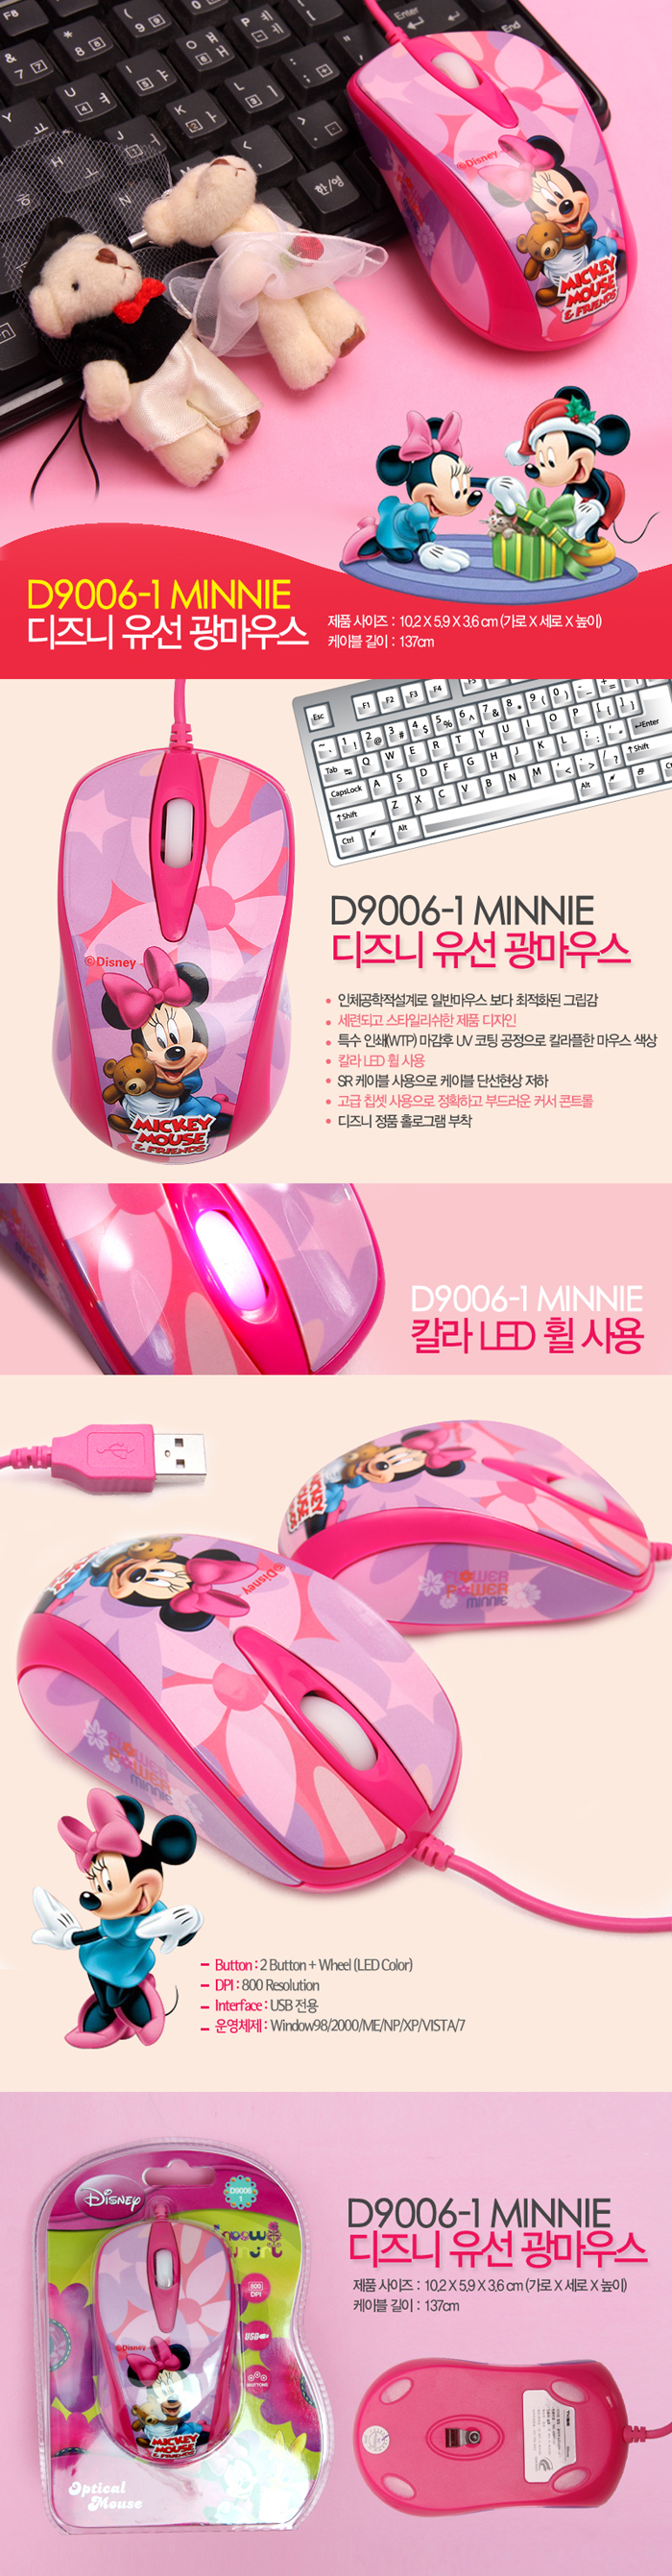 TKDS D9006-1 Walt Disney /Minnie Mouse/Cord Optical Mouse Character/USB Exclusive